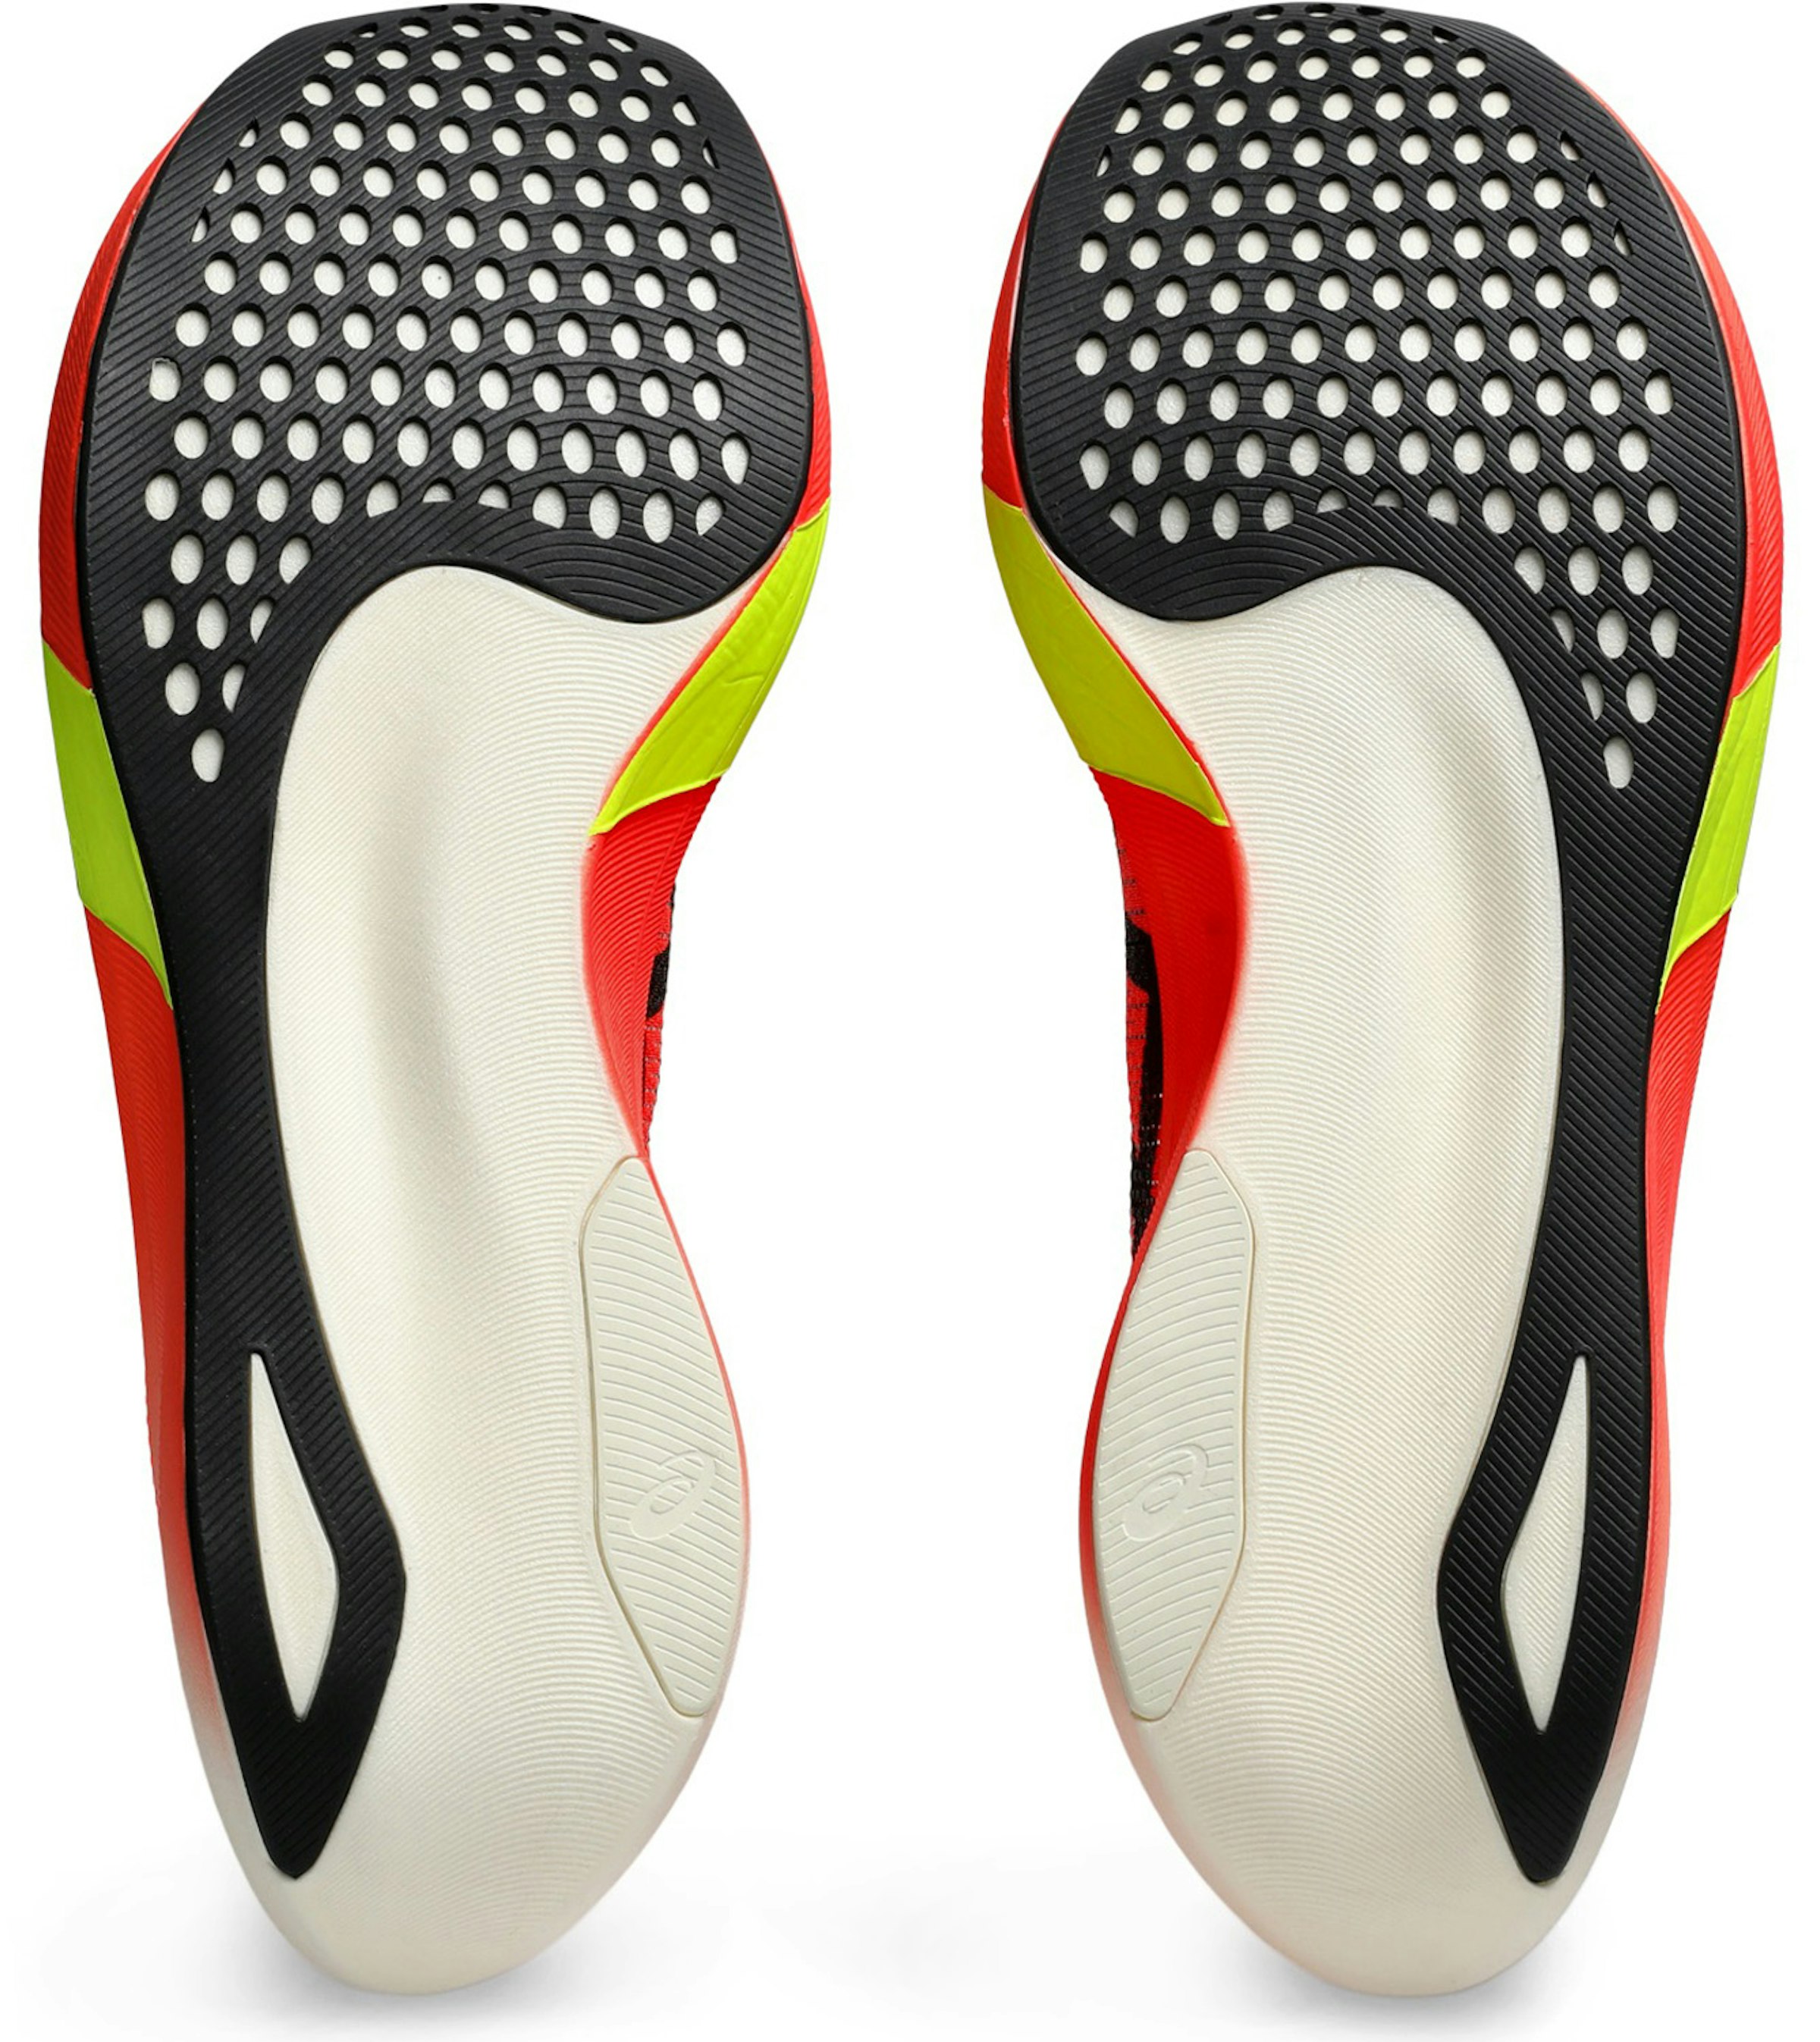 The outsole of the 'EDGE PARIS'. The long rubber part on the outer heel is a key characteristic